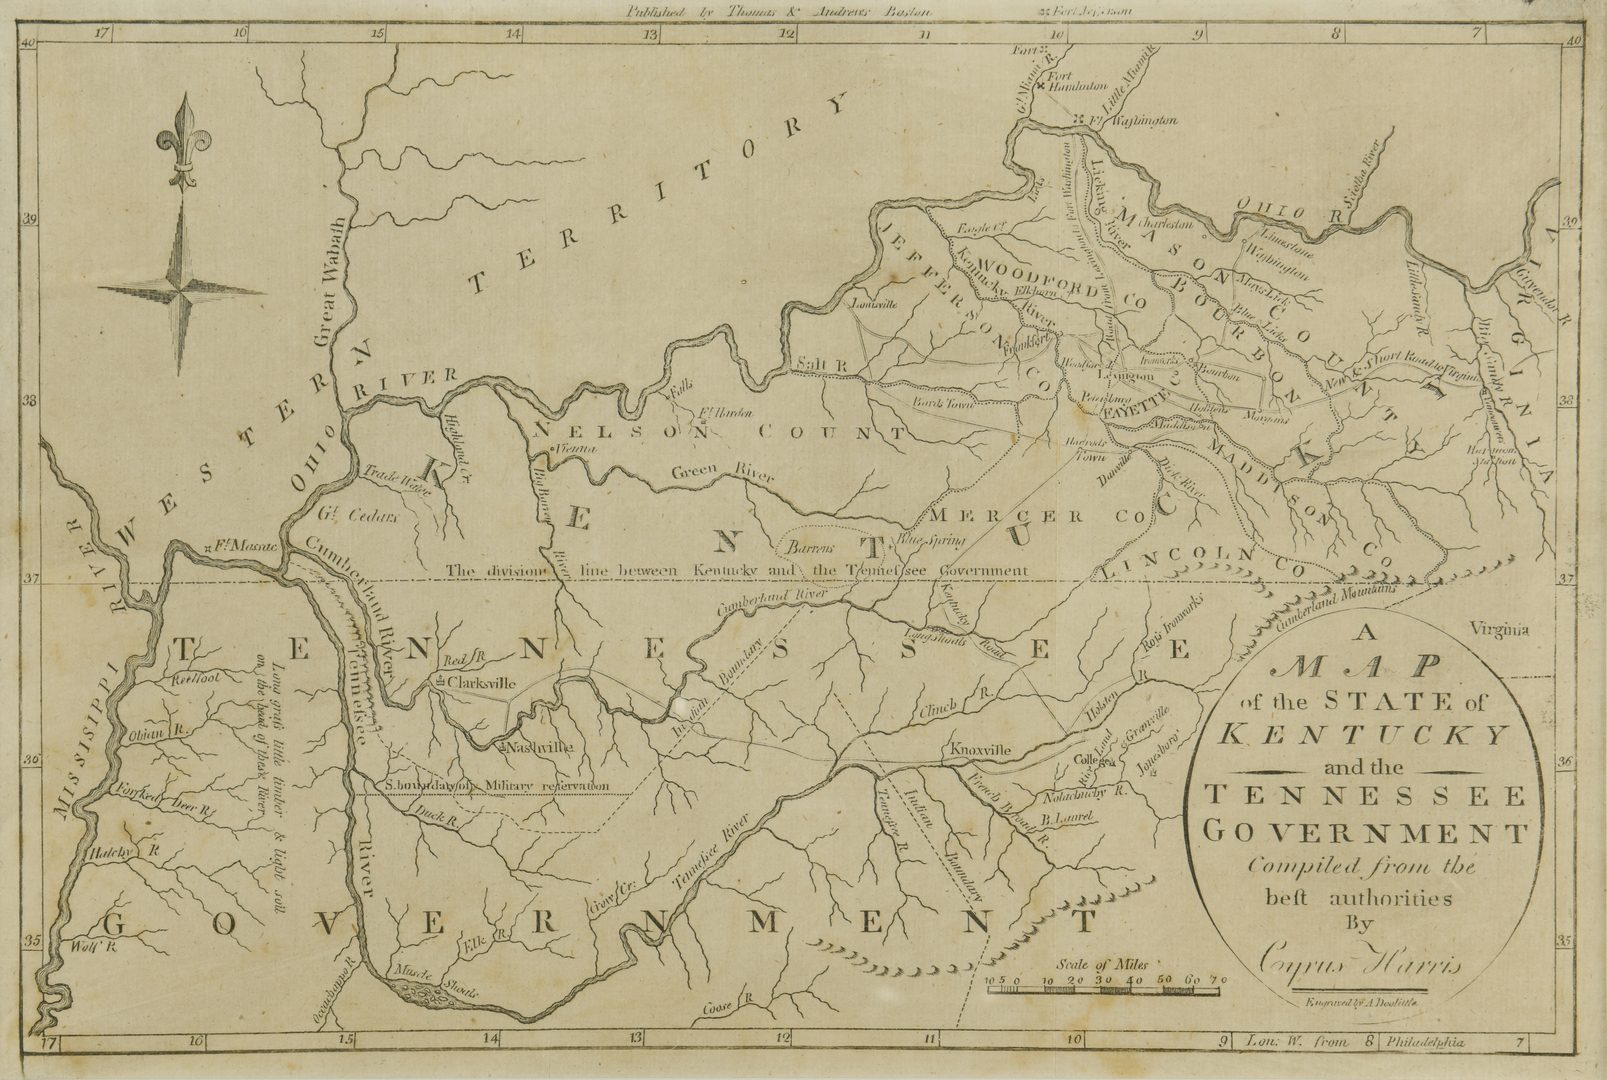 Lot 753: Kentucky and Tennessee Map, 1796 Harris